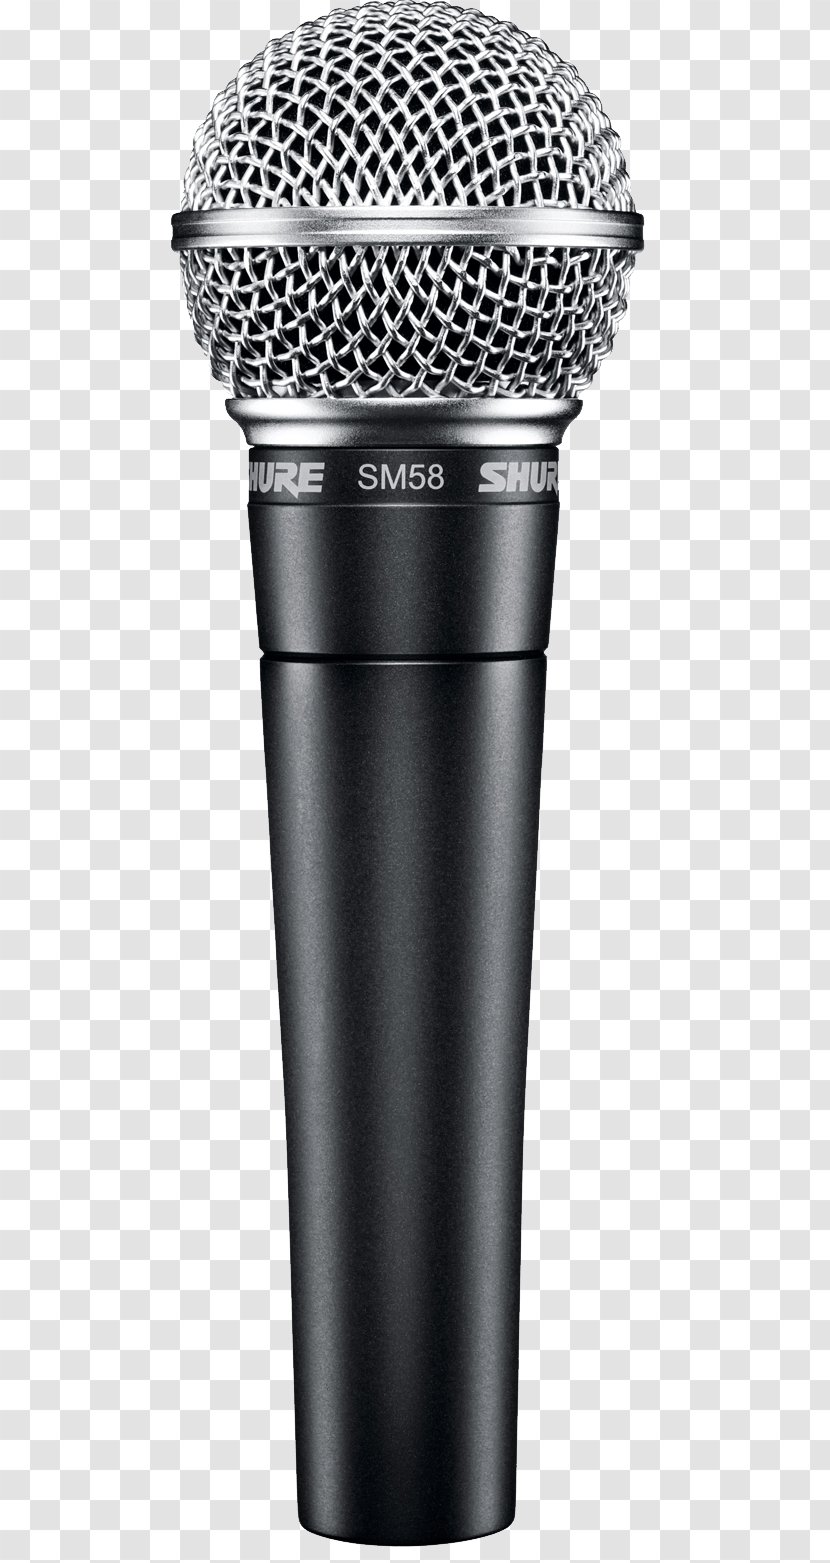 Microphone Shure SM58 Human Voice XLR Connector - Black And White - Image Transparent PNG